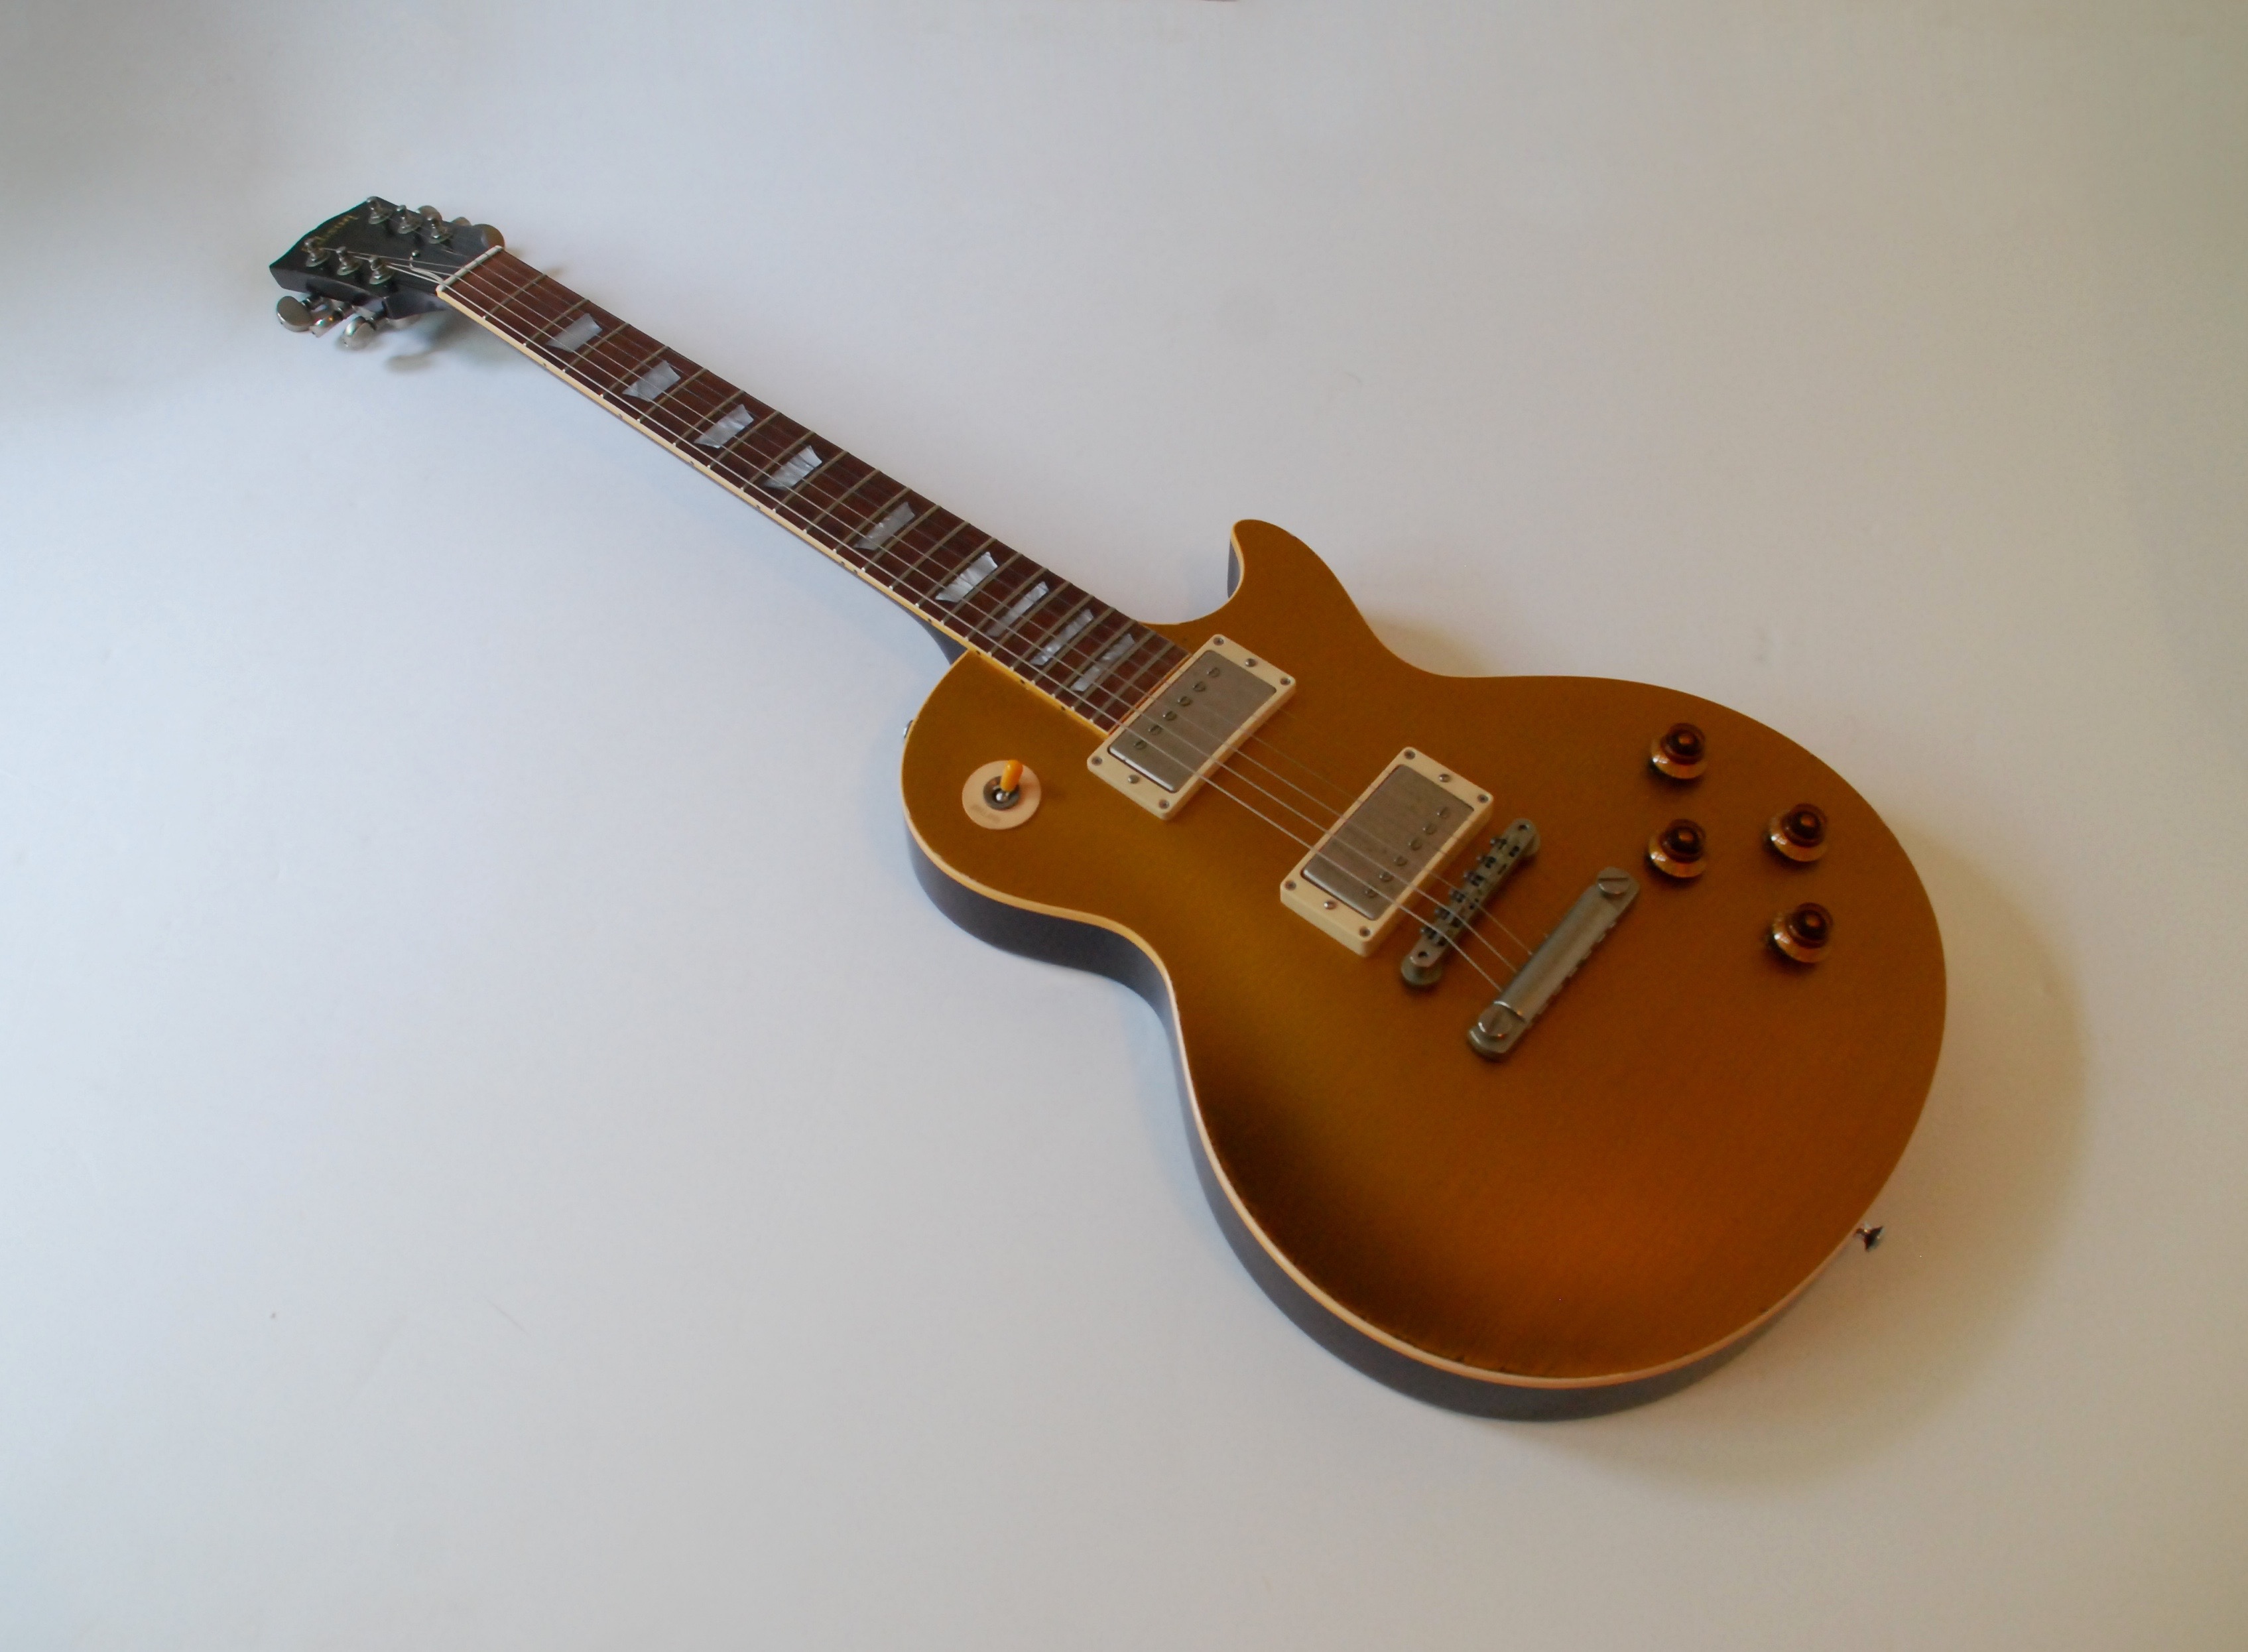 Gibson Les Paul Dickey Betts Goldie Tom Murphy Aged 2001 Goldtop Guitar For Sale Bass N Guitar